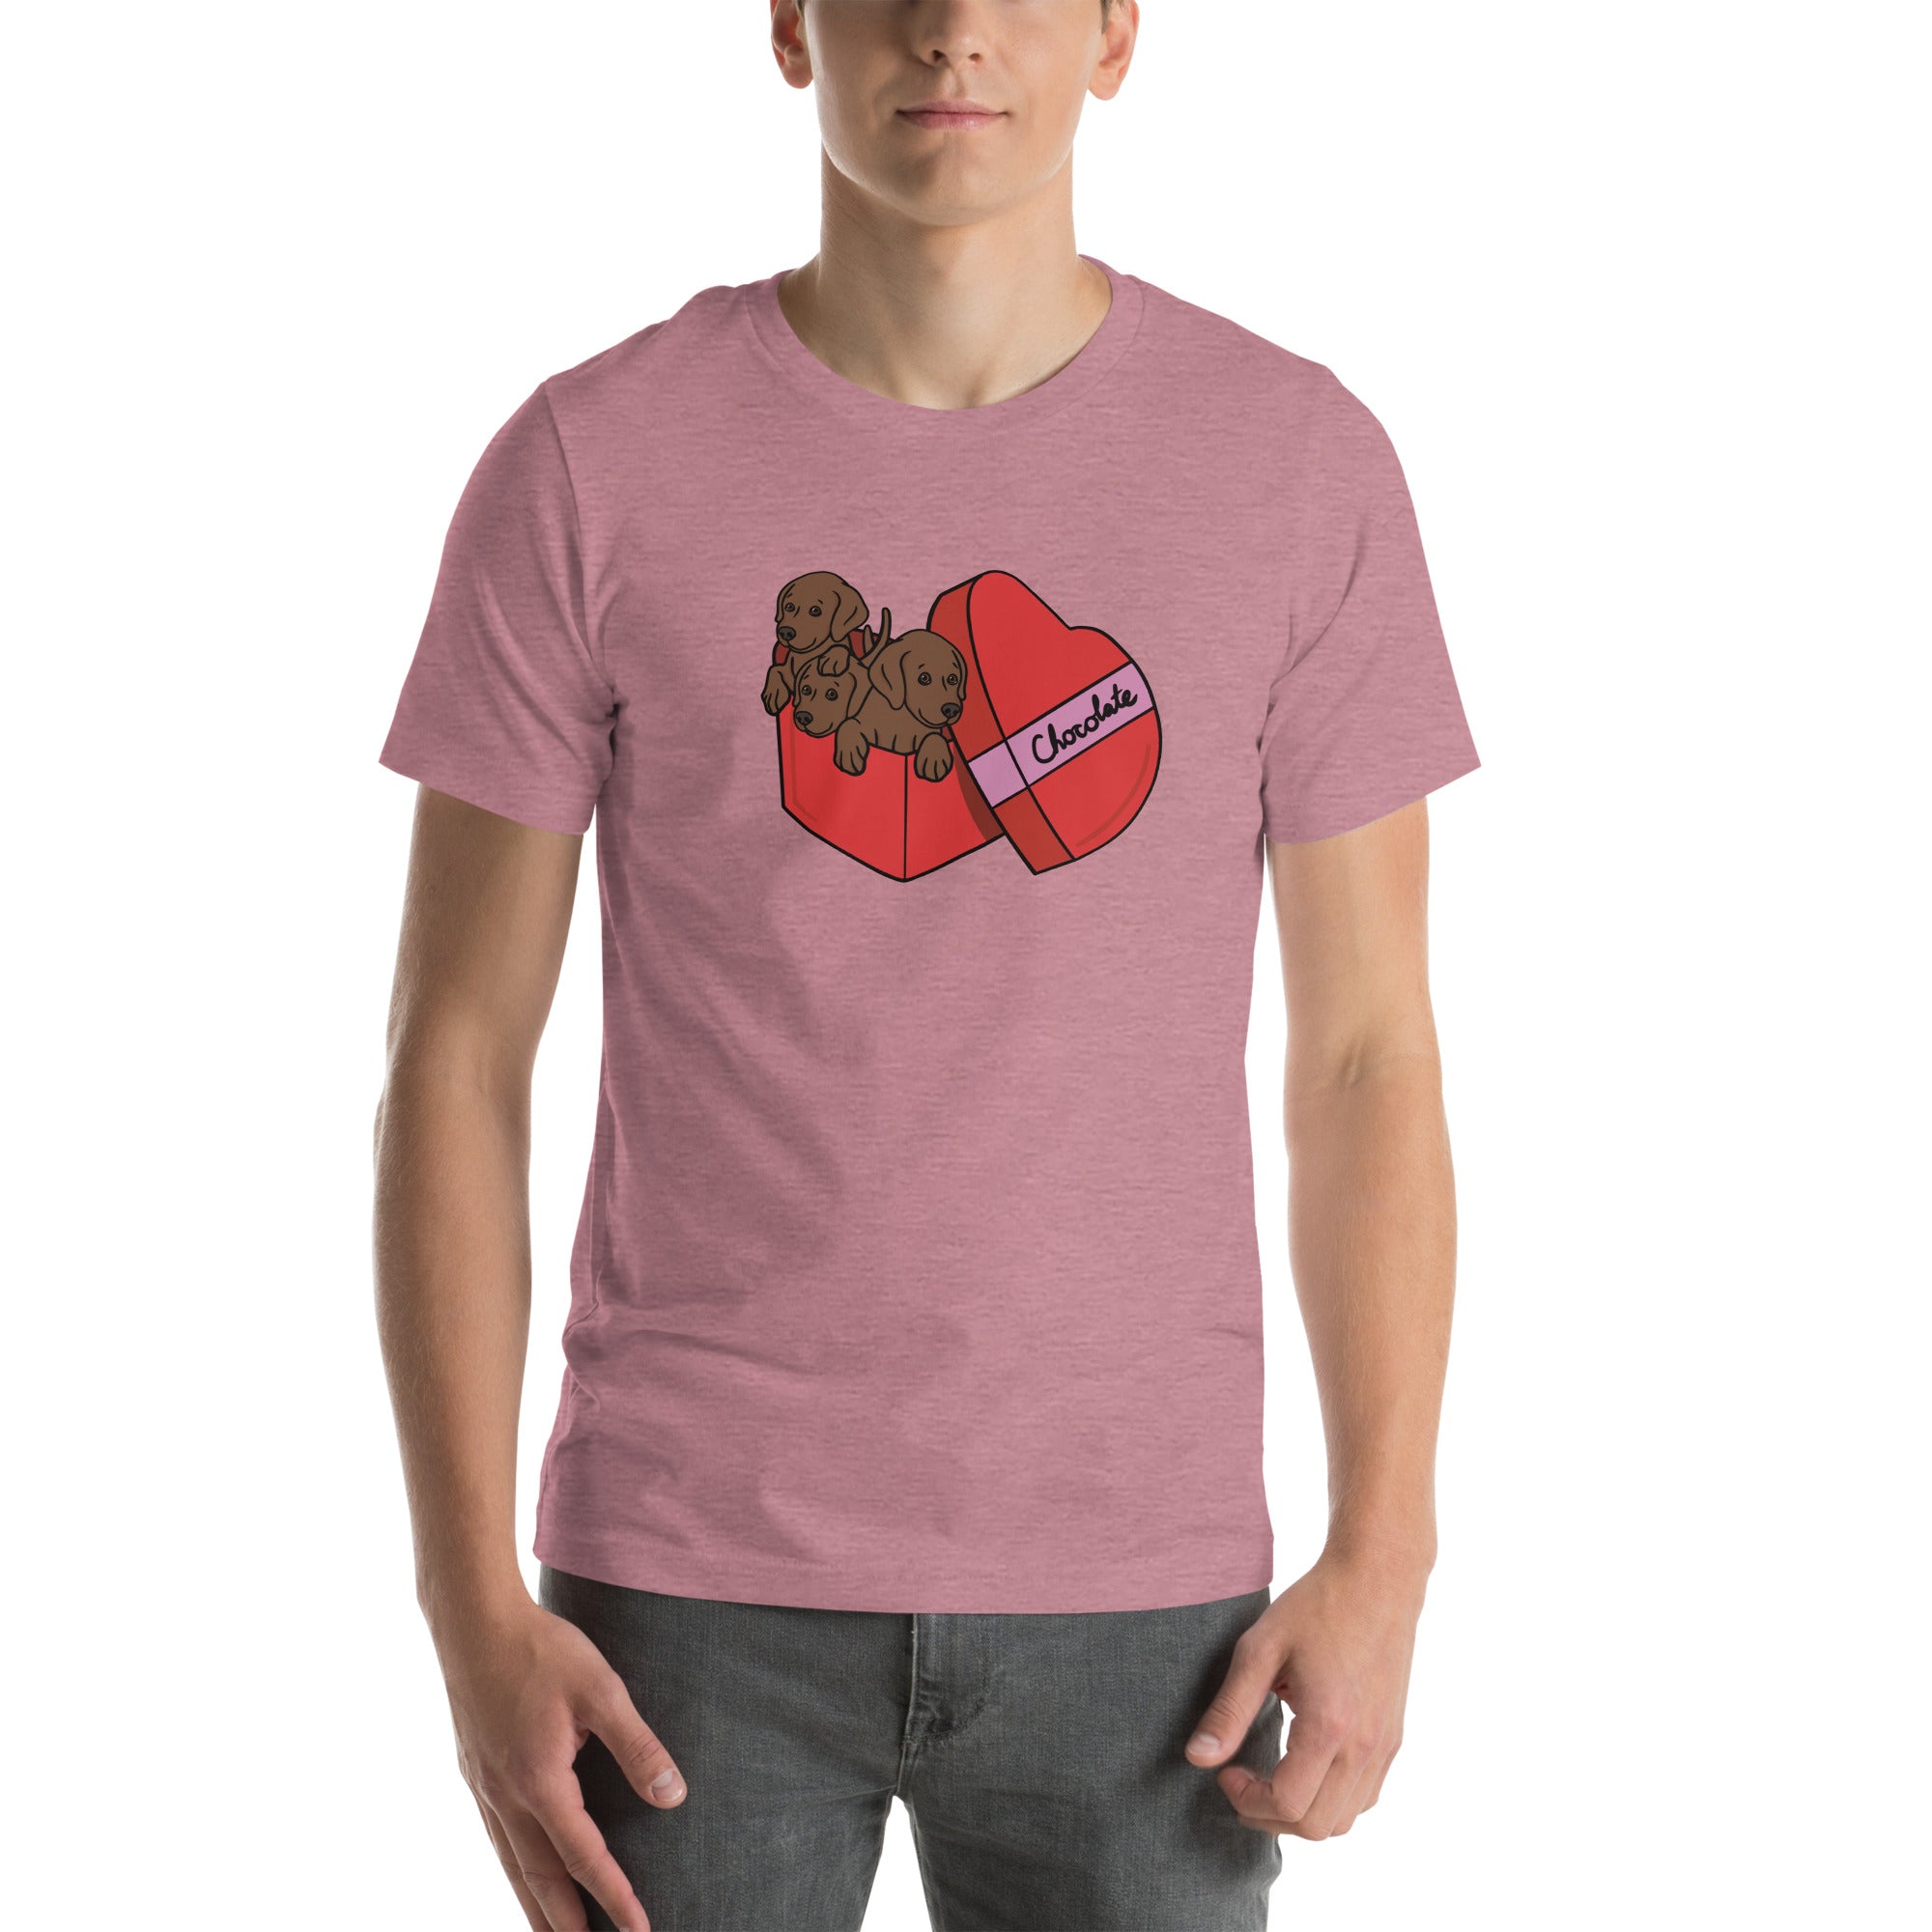 Box of Chocolates T-Shirt - TAILWAGS UNLIMITED